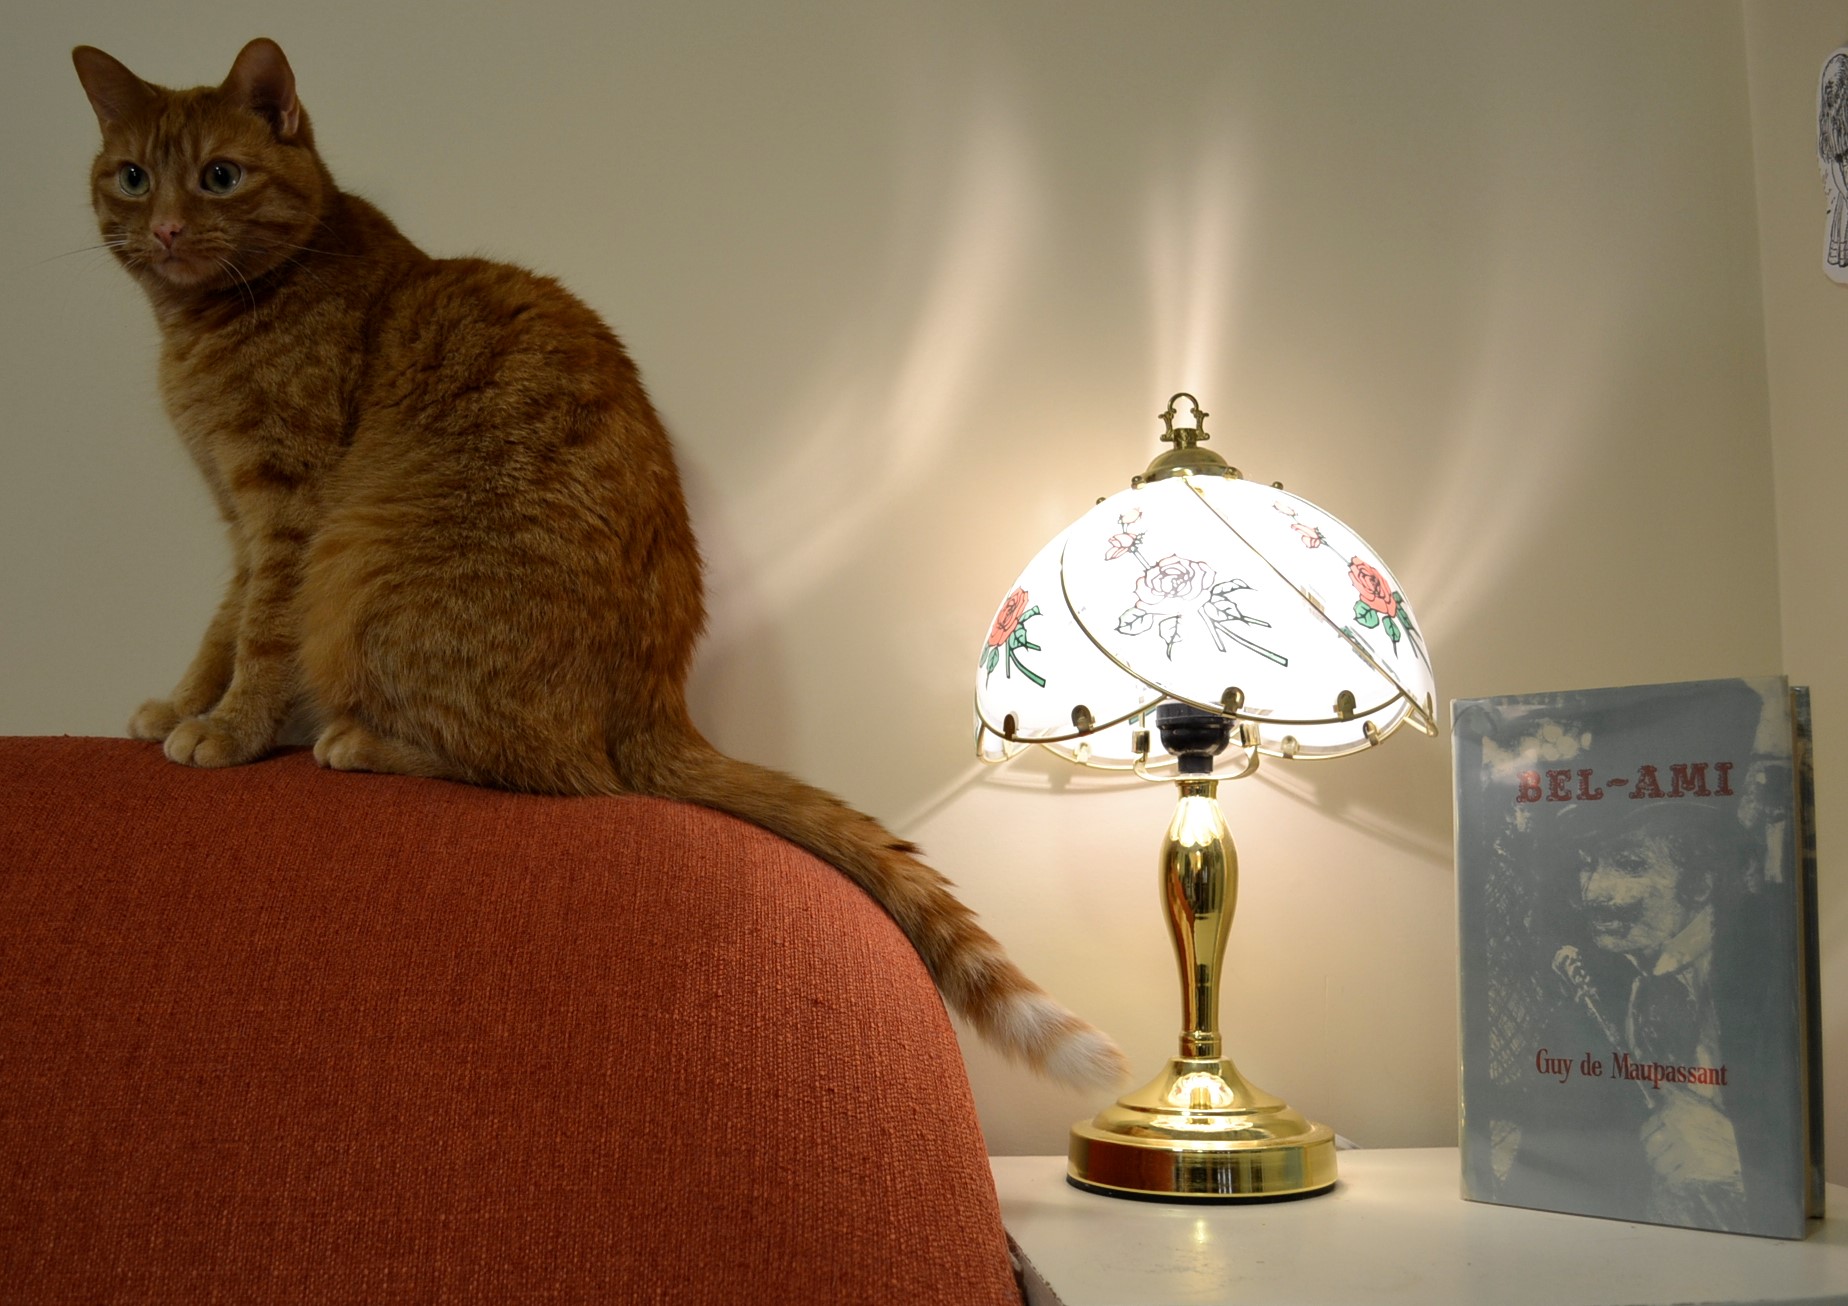 An orange tabby sits beside a brass lamp and Bel-Ami.